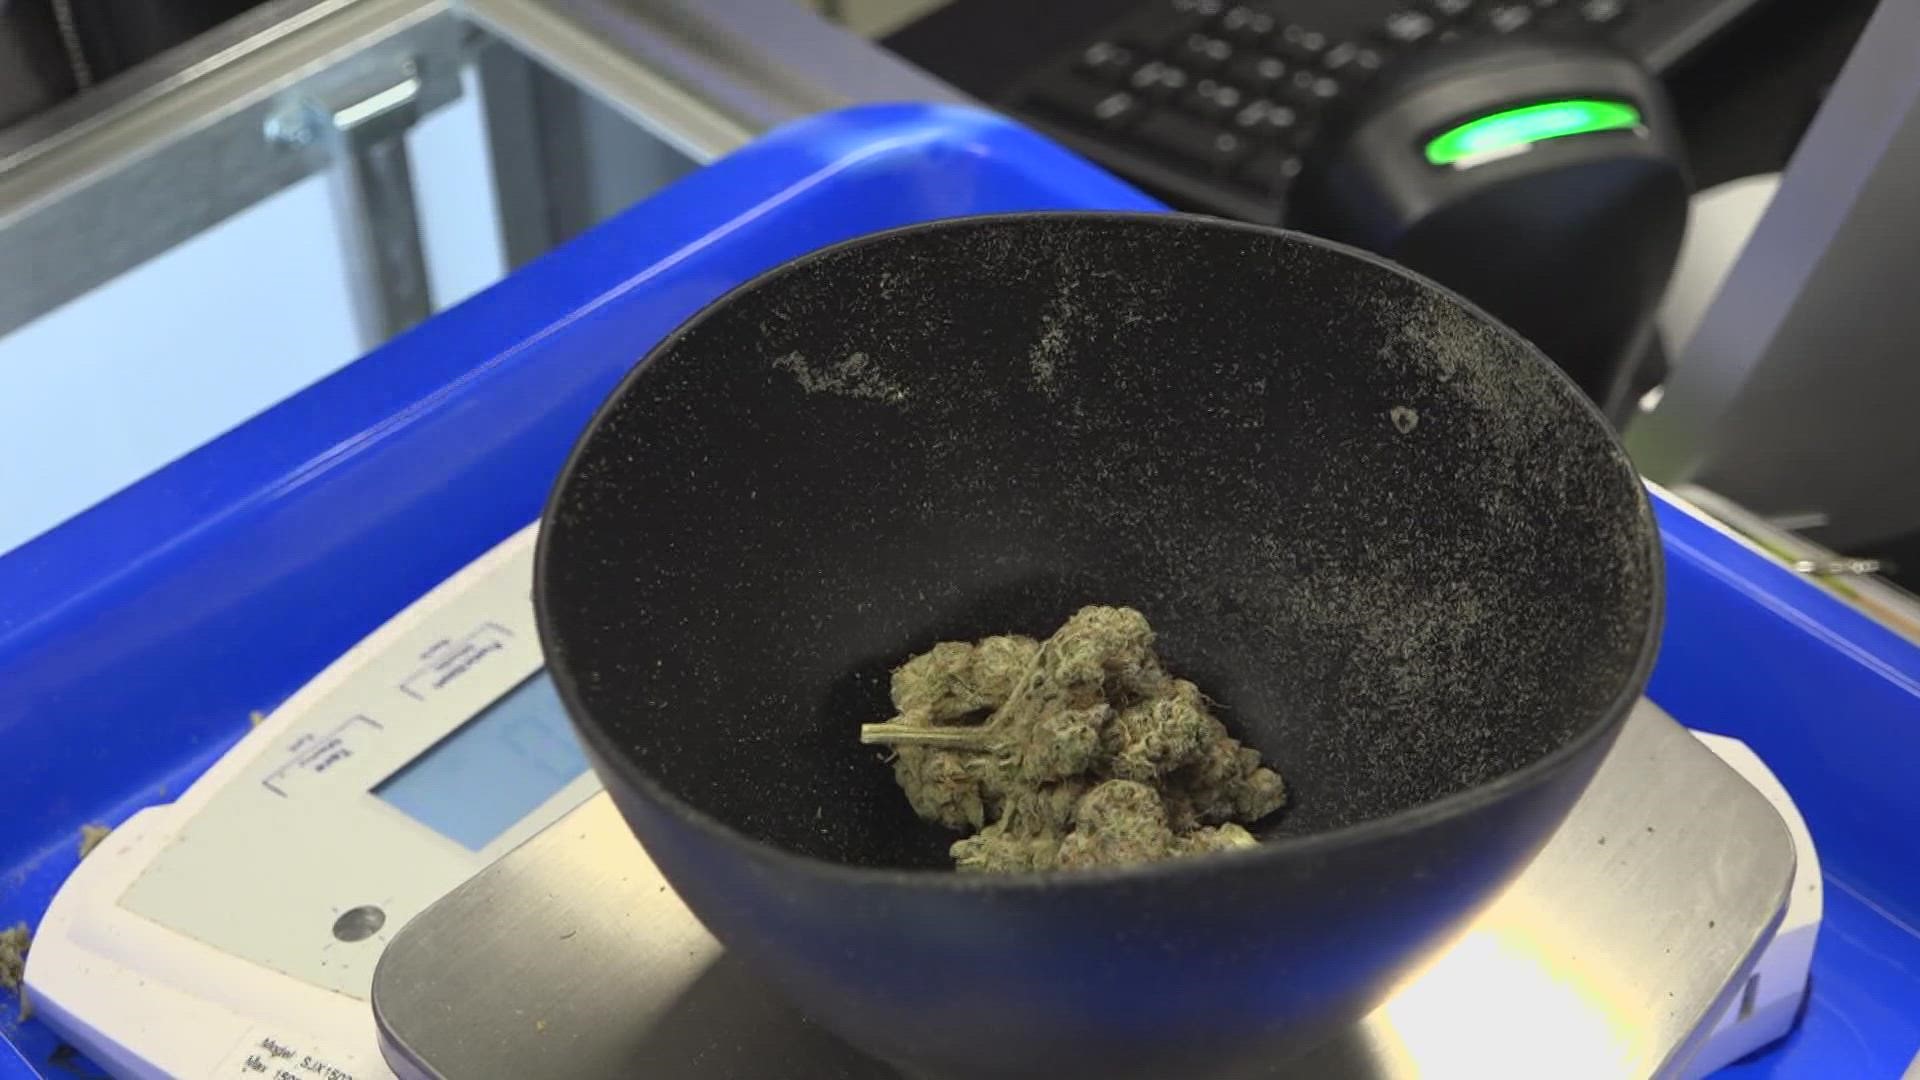 Missourians can now carry and use up to 3 ounces of marijuana under article 14. Marijuana will still be illegal on school campuses and some locations.